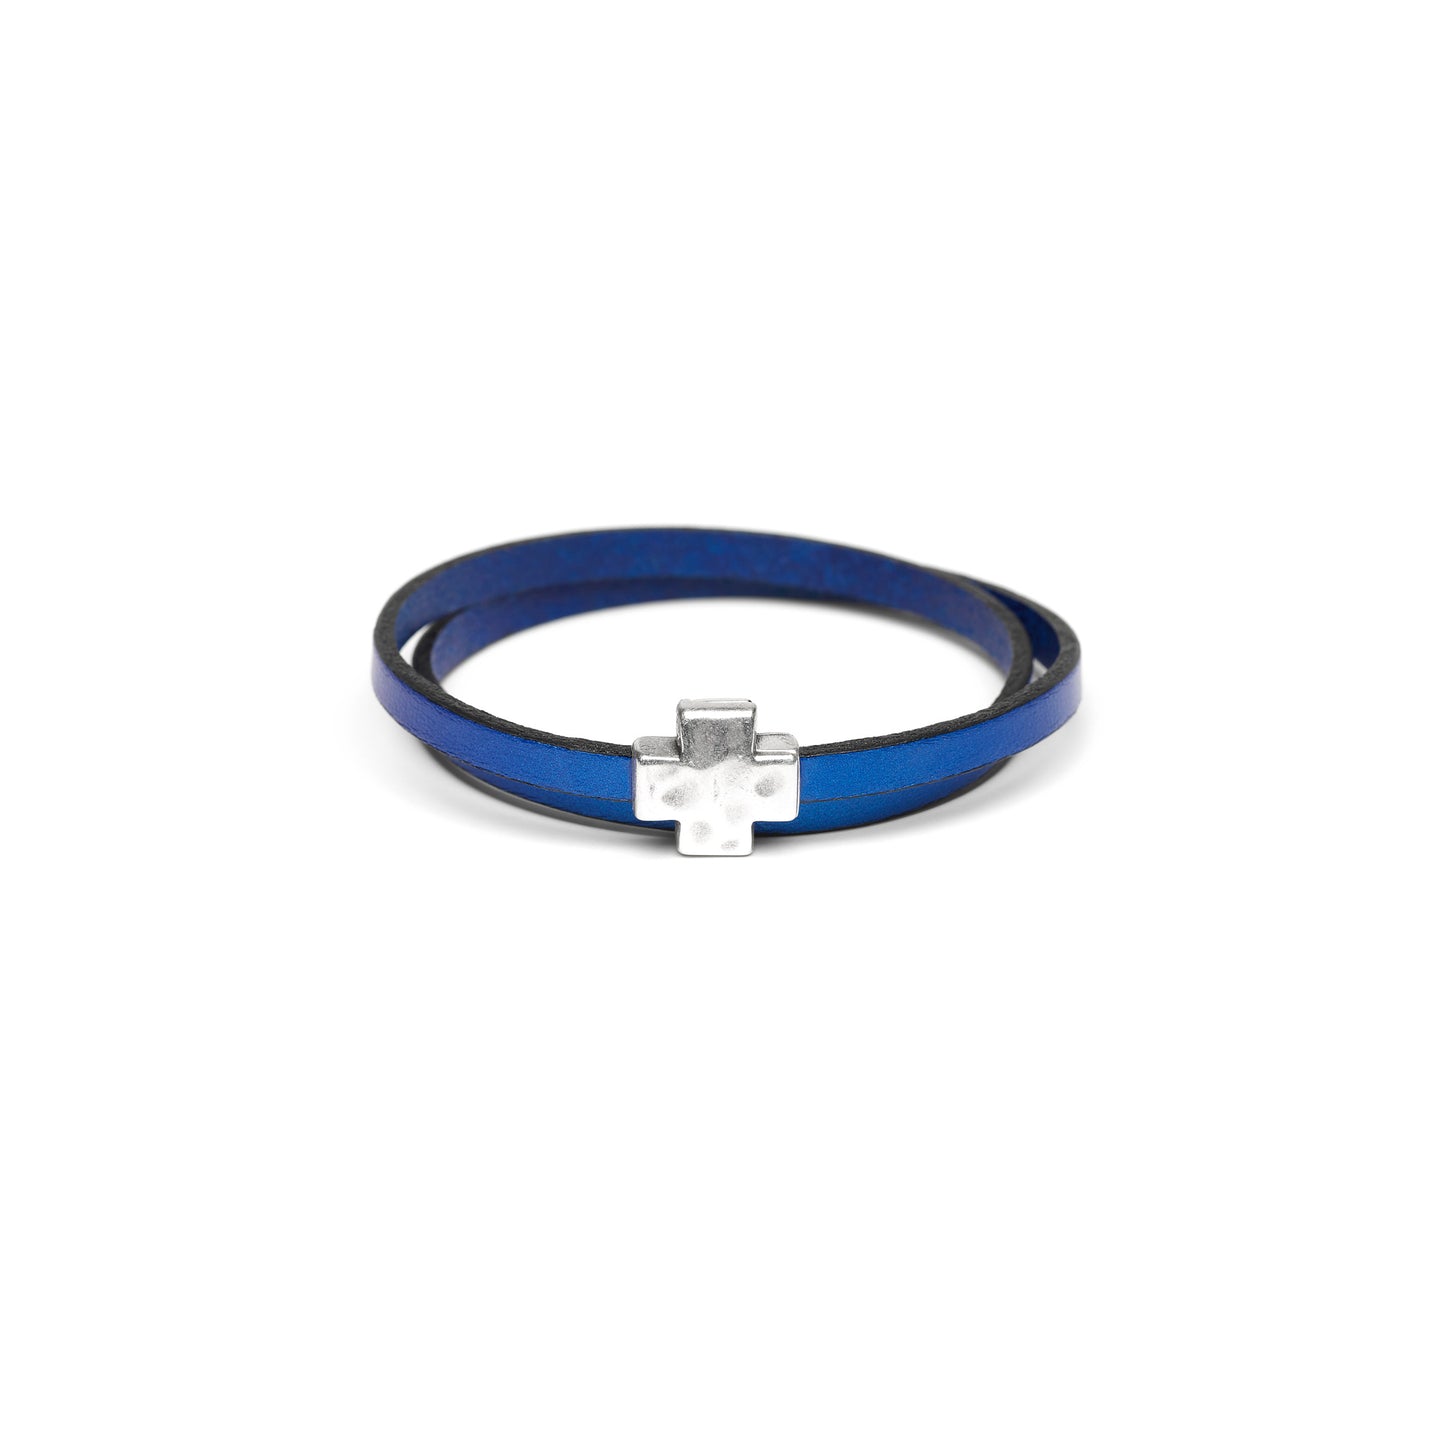 "Wrap it Up Bracelet" with Silver Cross - Double Length - Electric Blue